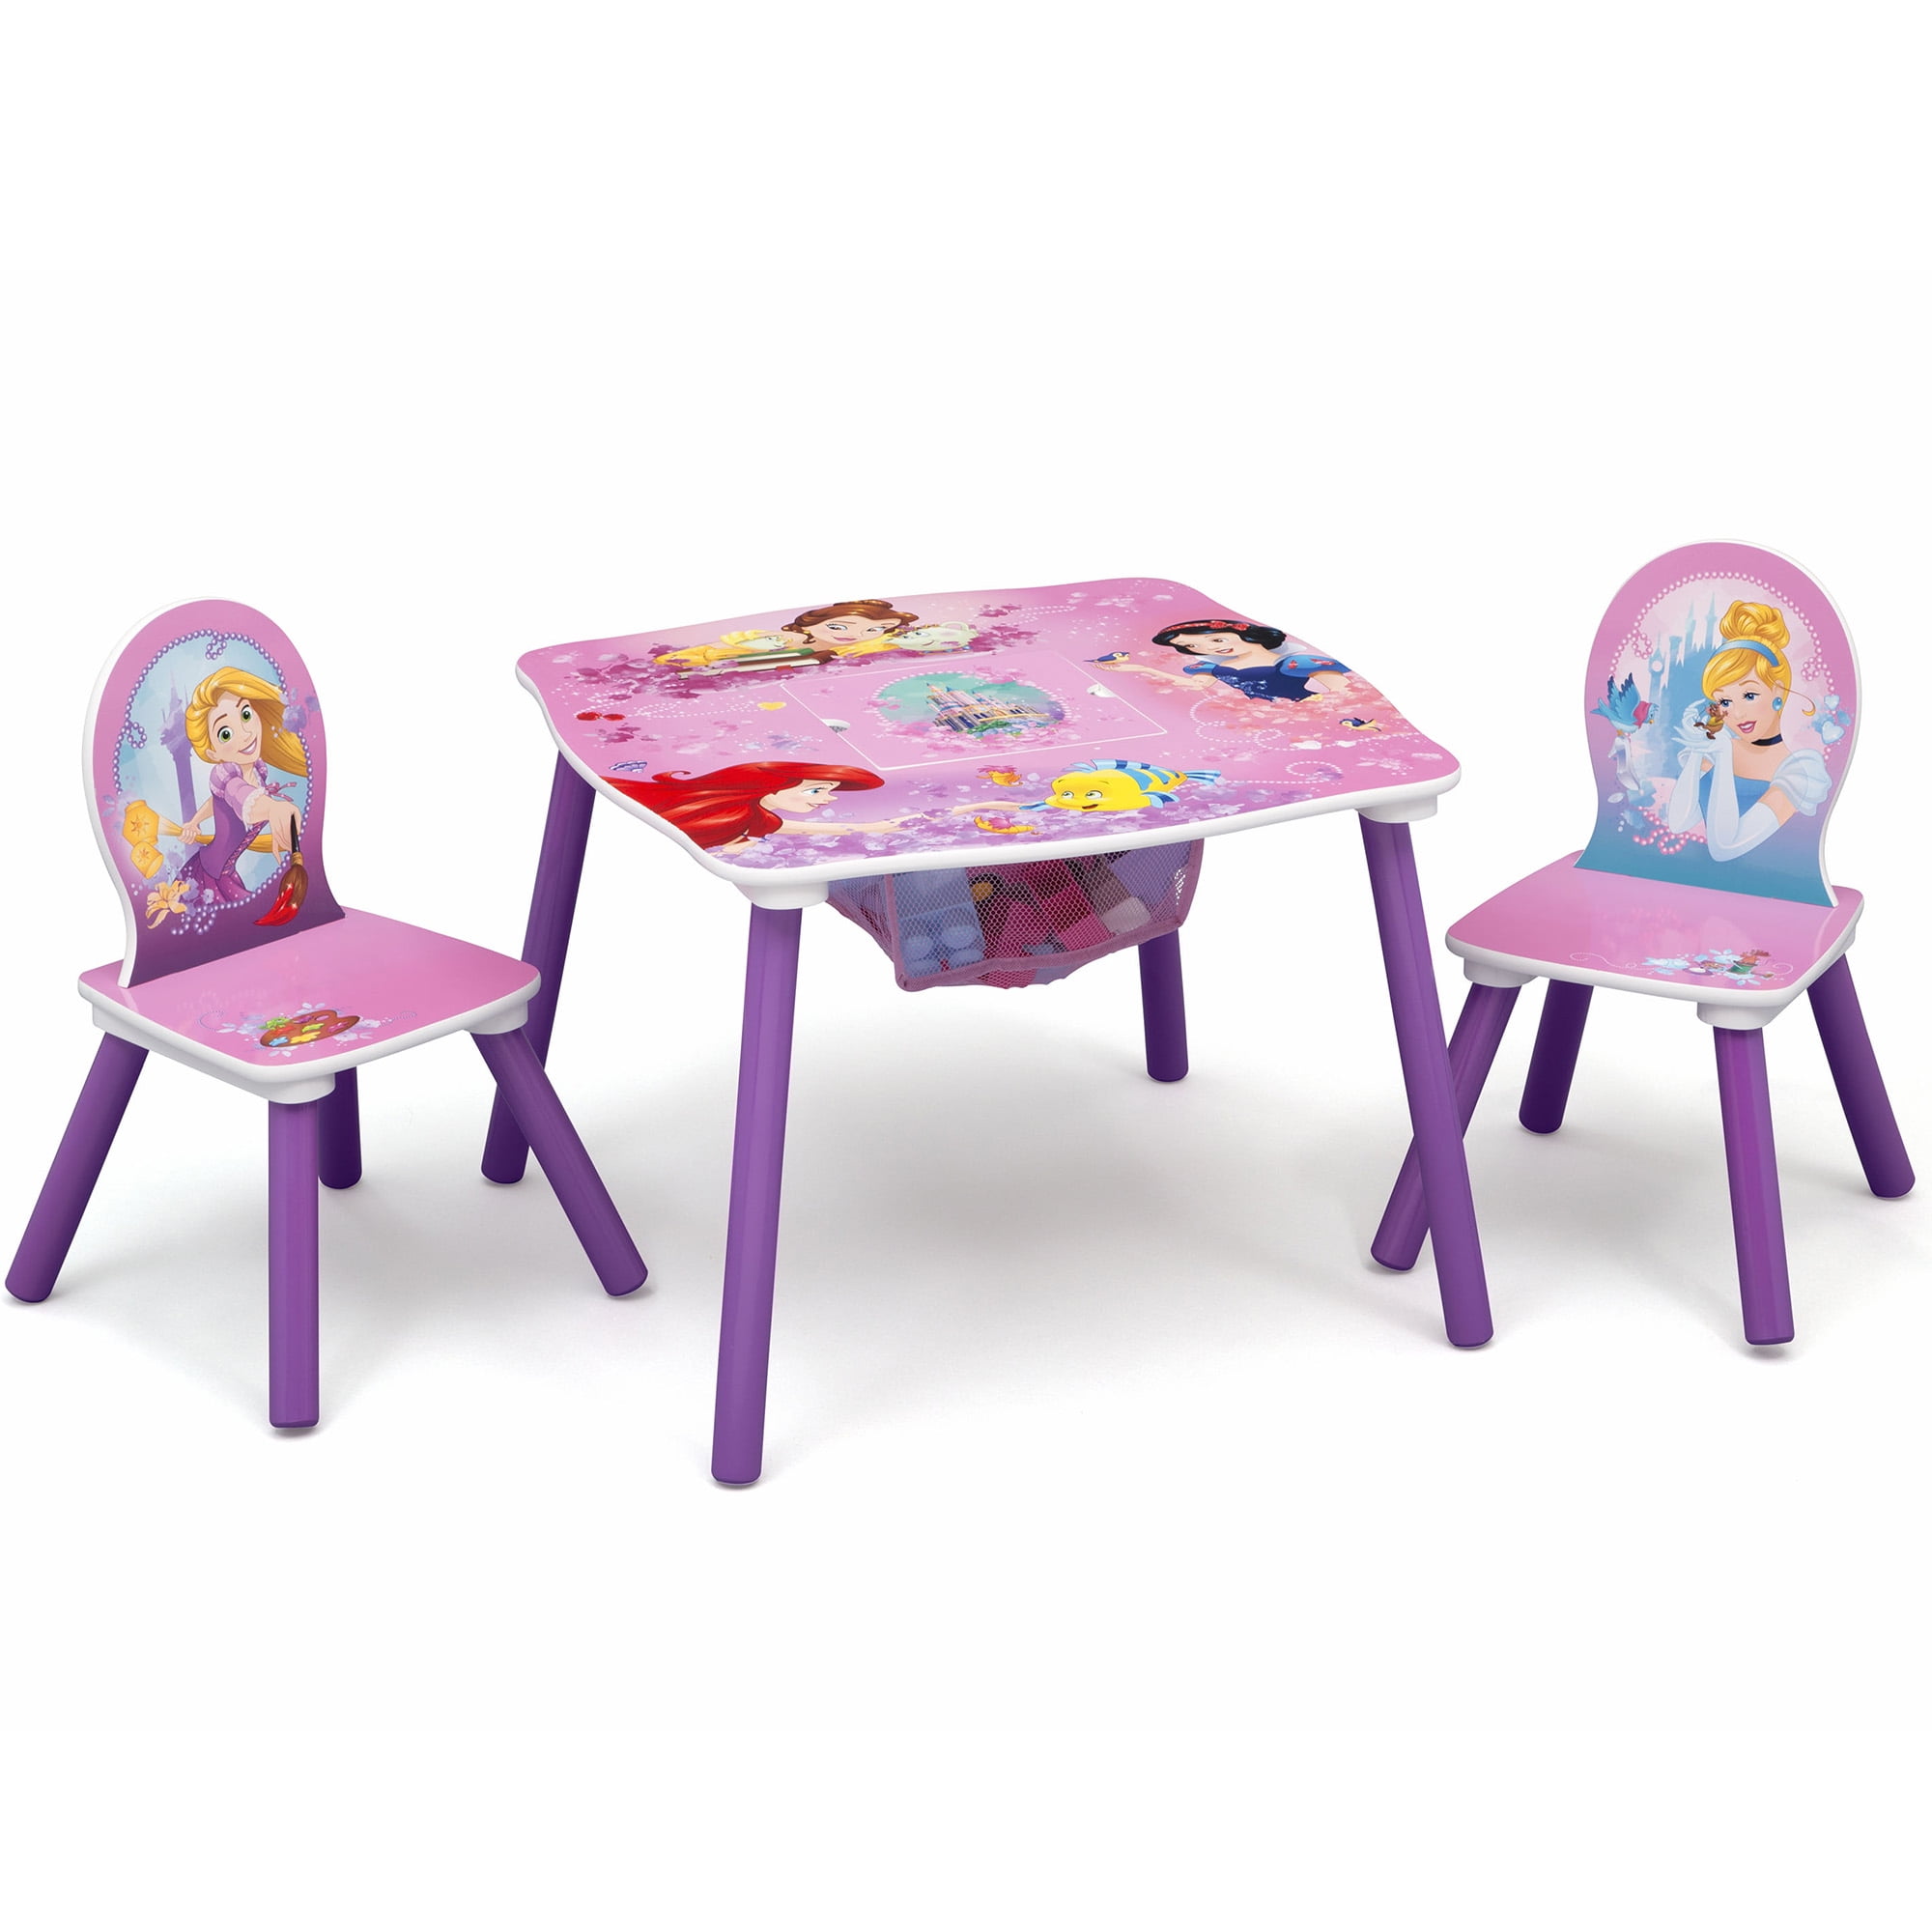 Disney Princess Wood Kids Table and Chair Set with Storage by Delta Children - Walmart.com